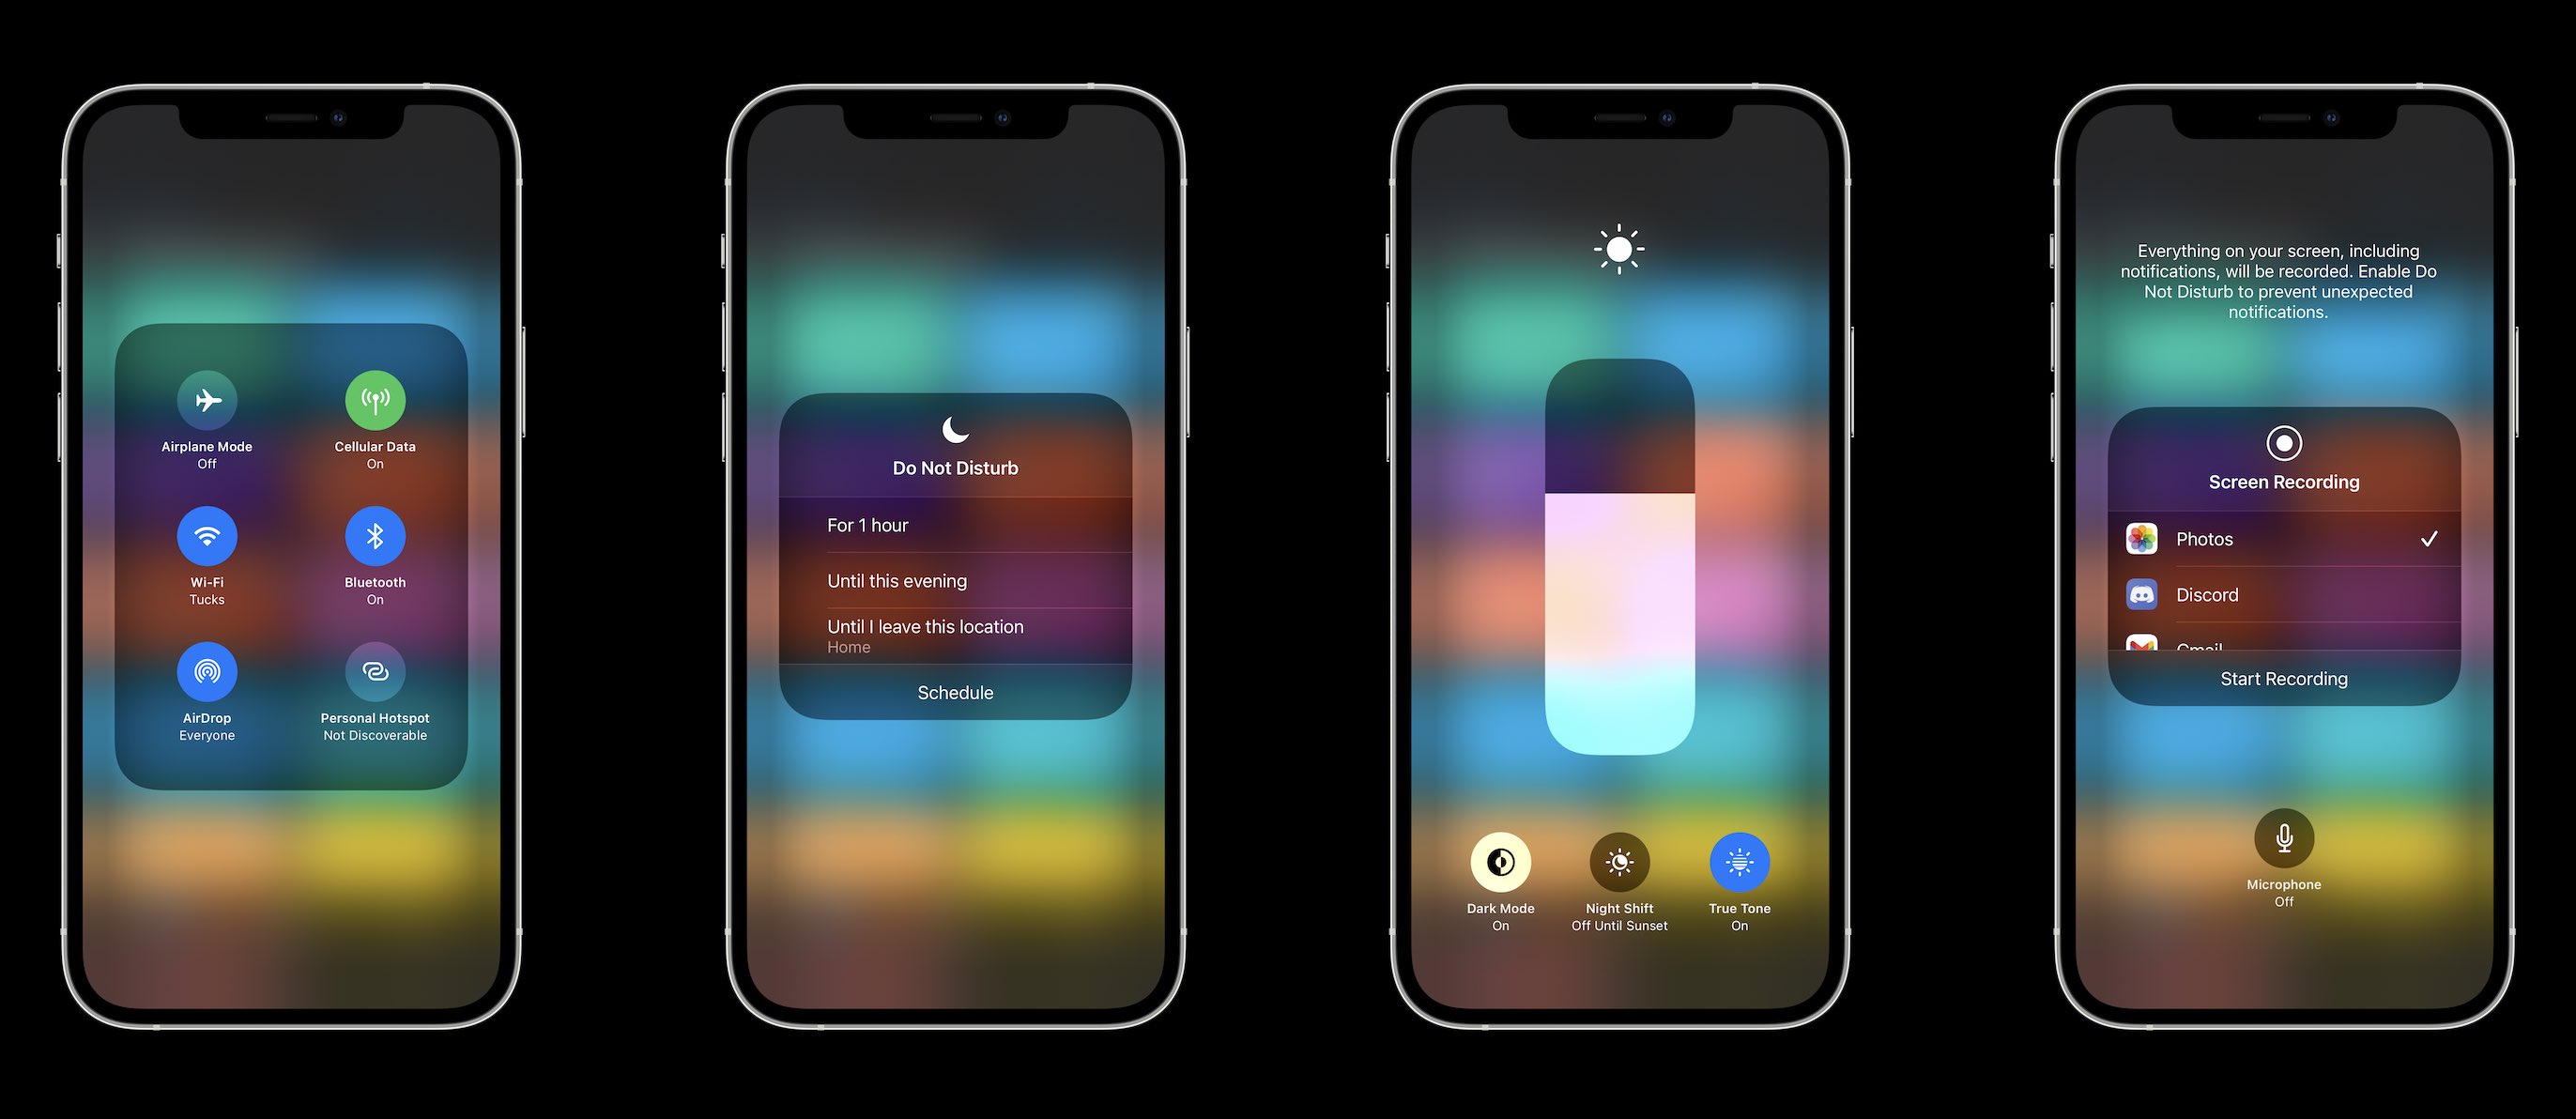 How to customize Control Center on iPhone and iPad in iOS walkthrough 3